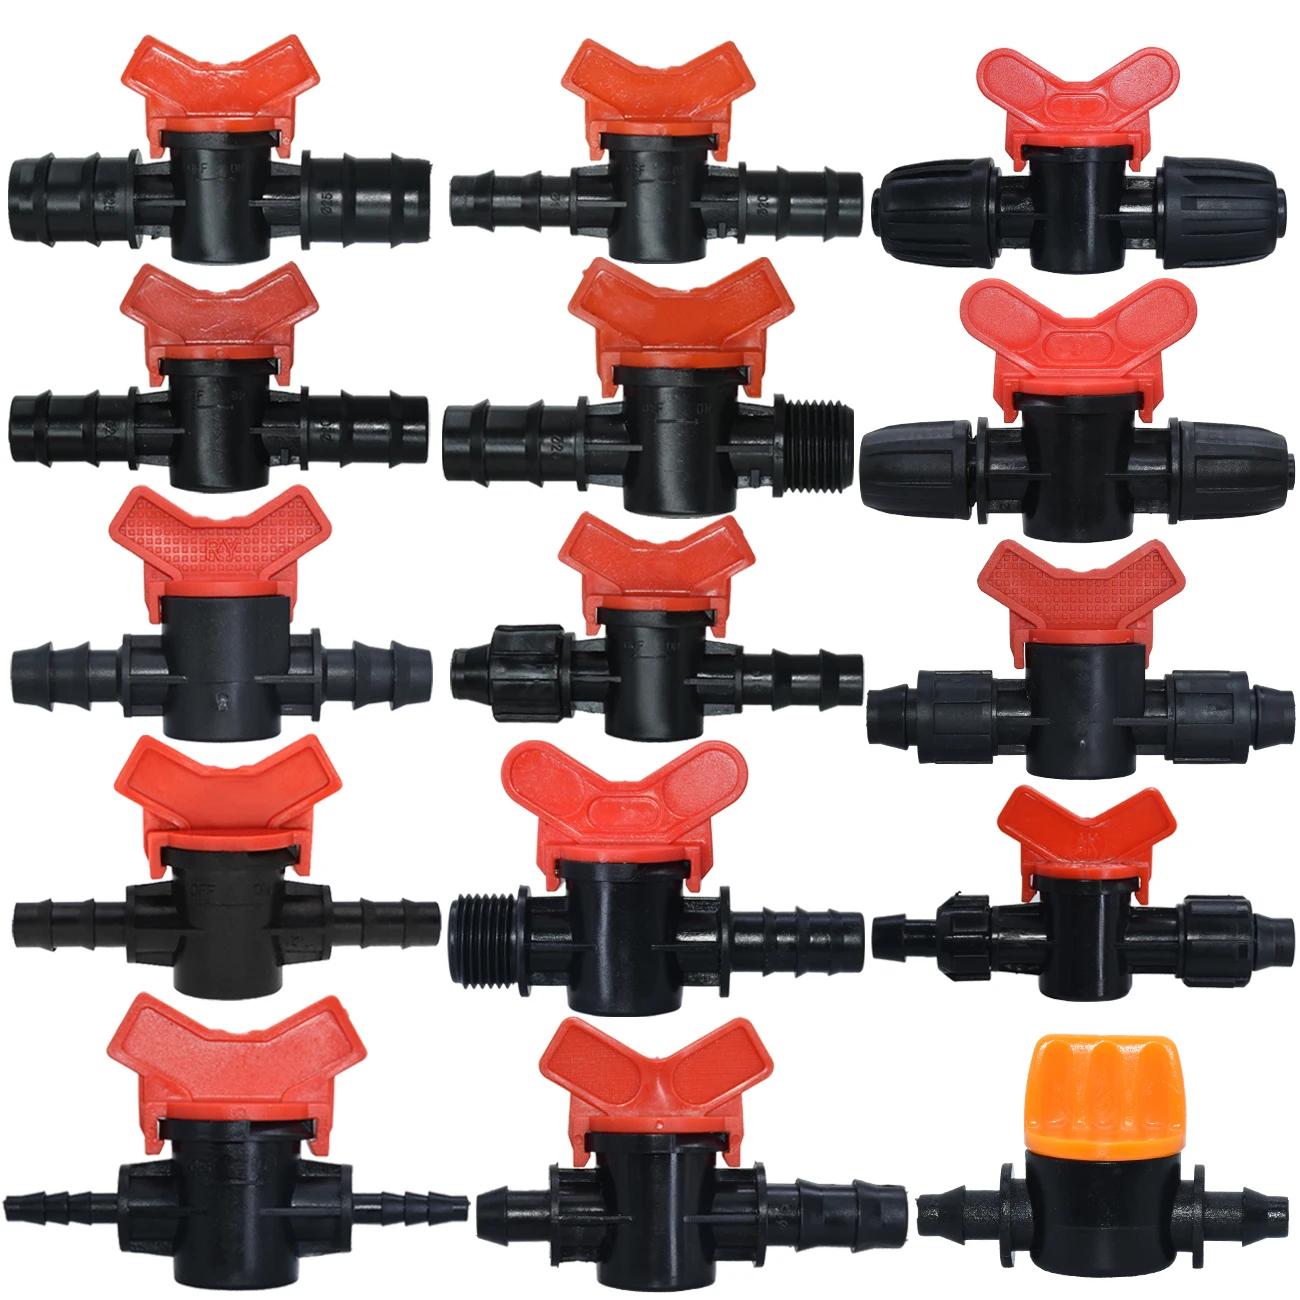 

SPRYCLE Waterstop Barb Connector Mini Valve 16mm 20mm 25mm 4/7mm 8/11mm Drip Irrigation Garden Hose 1/4 1/2 3/4 Watering System